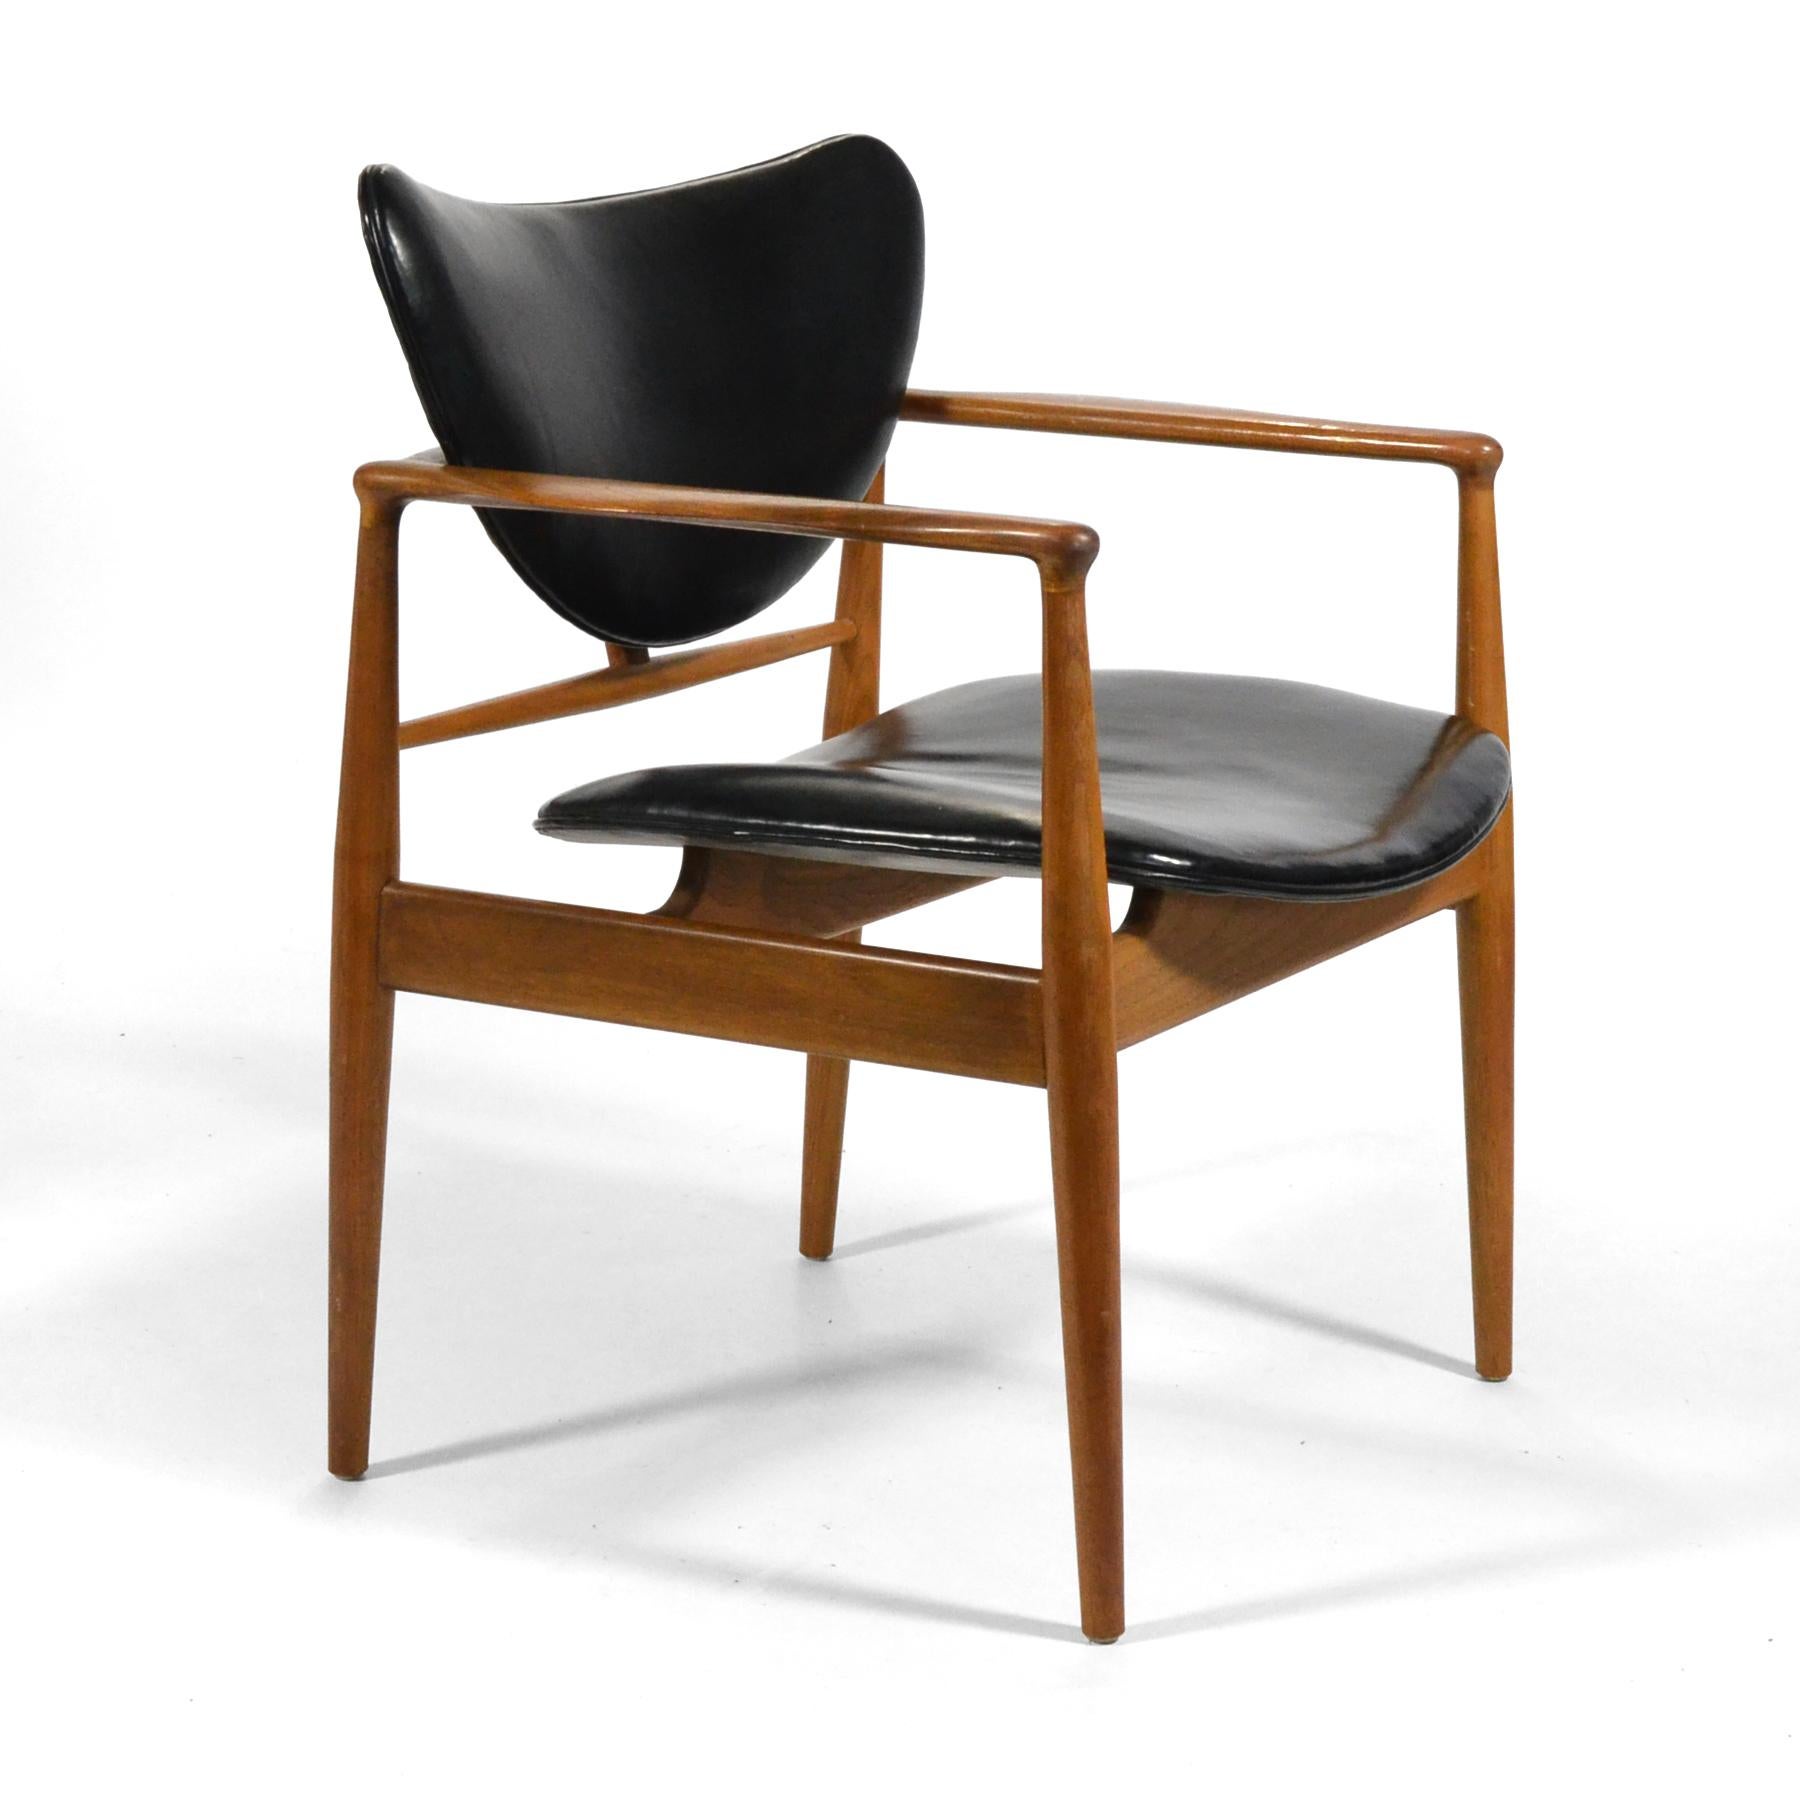 Acknowledged as the father of Danish modern design, Finn Juhl worked closely with cabinetmaker Niels Vodder to develop his innovative designs. Their collaboration was groundbreaking for separating the seat and back from the frame of the chair.